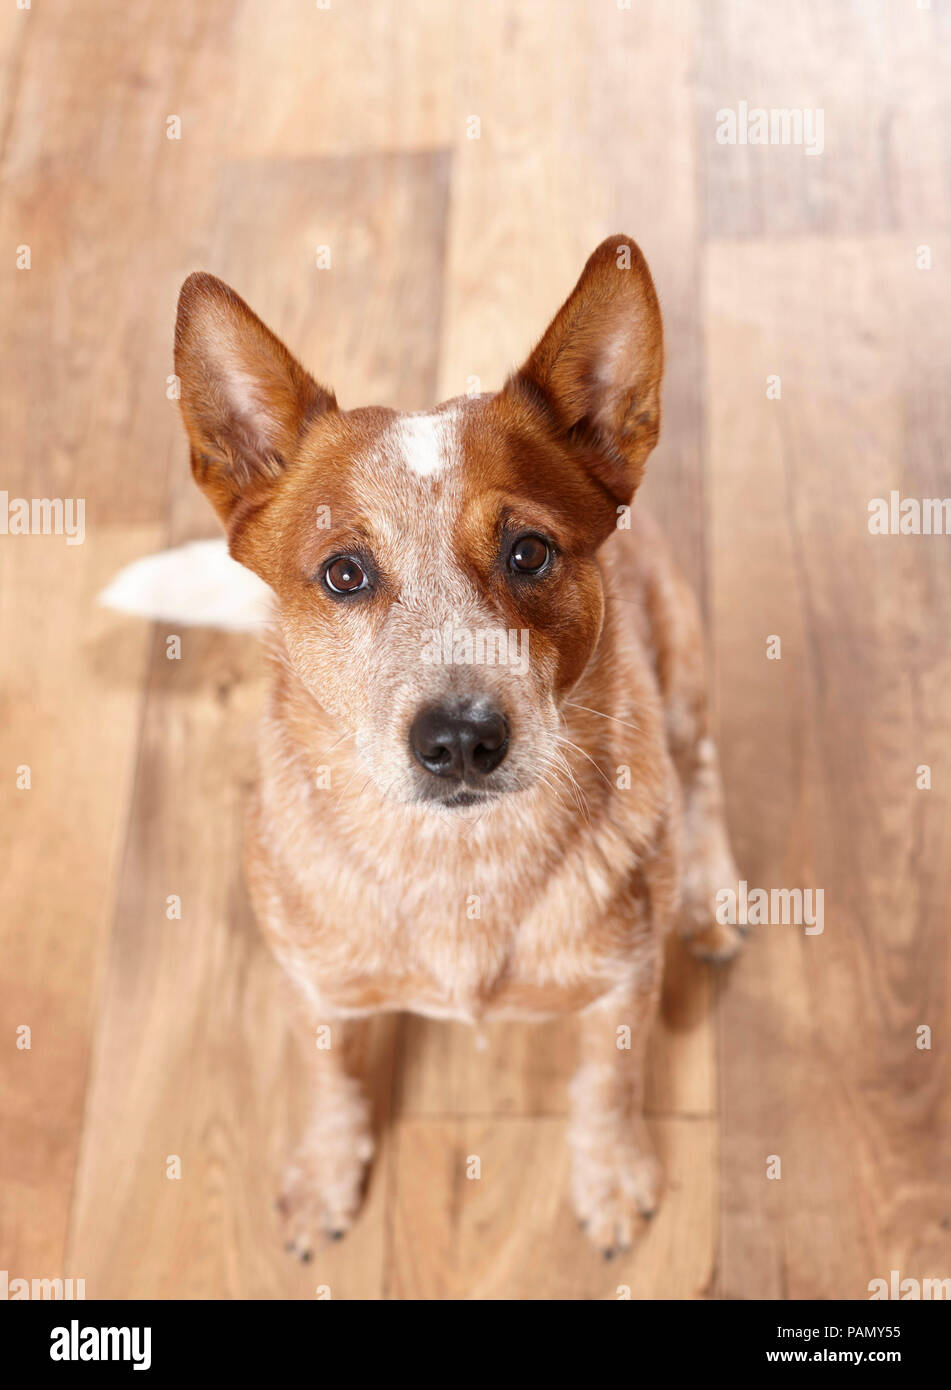 Australian Cattle Dog sitting on parquet floor, looking up. Germany. Stock Photo